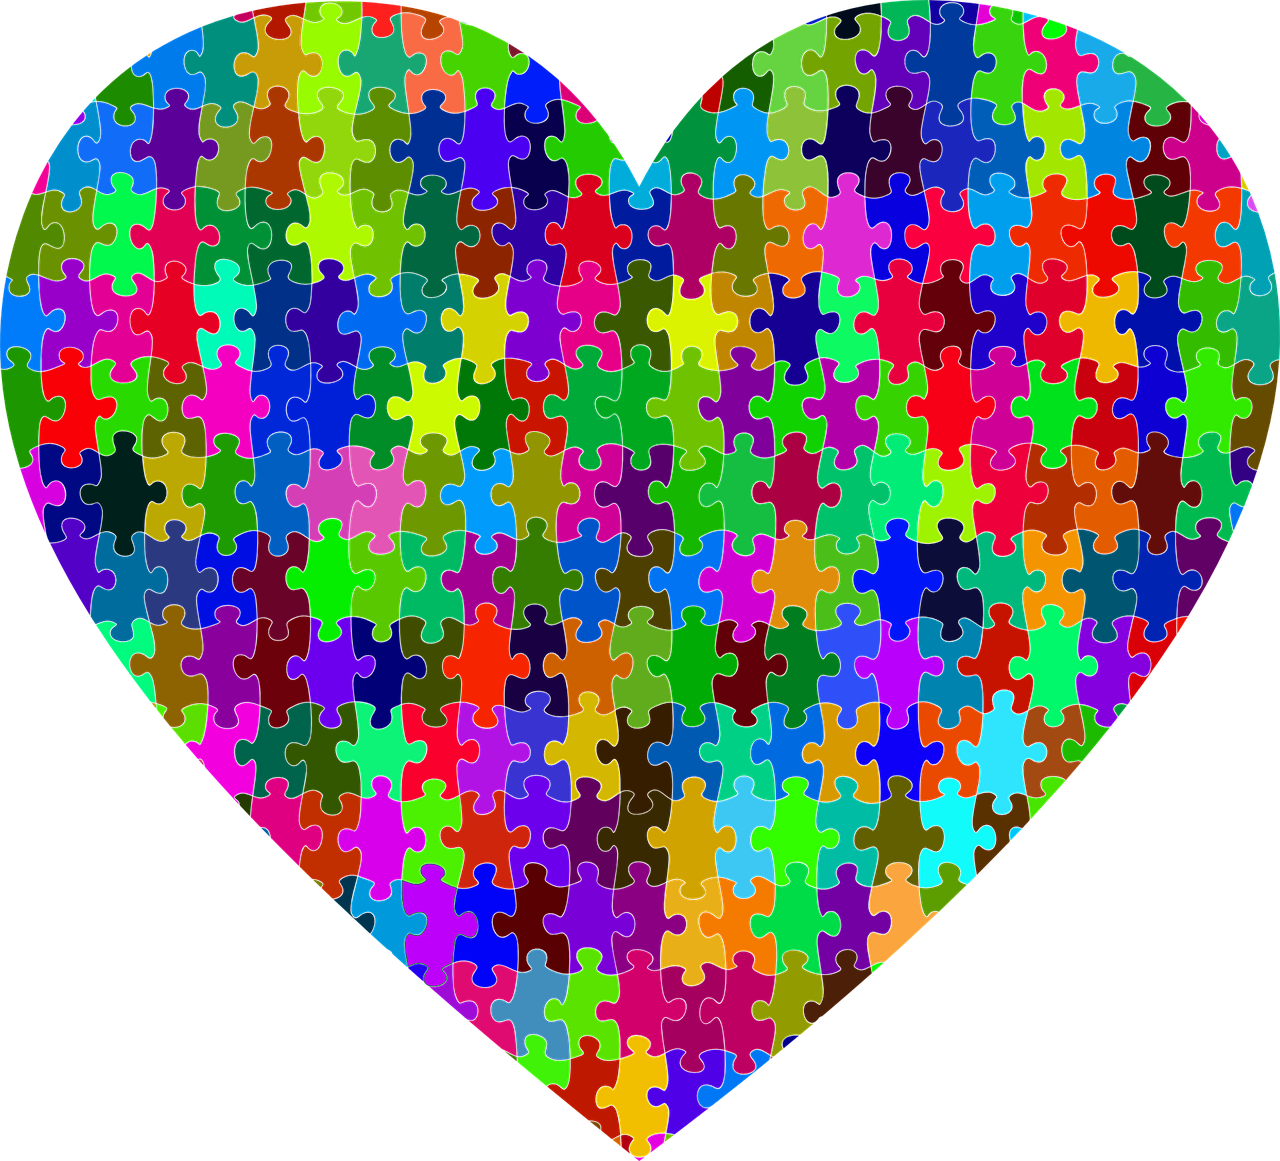 Image of a Heart formed of Puzzle Pieces